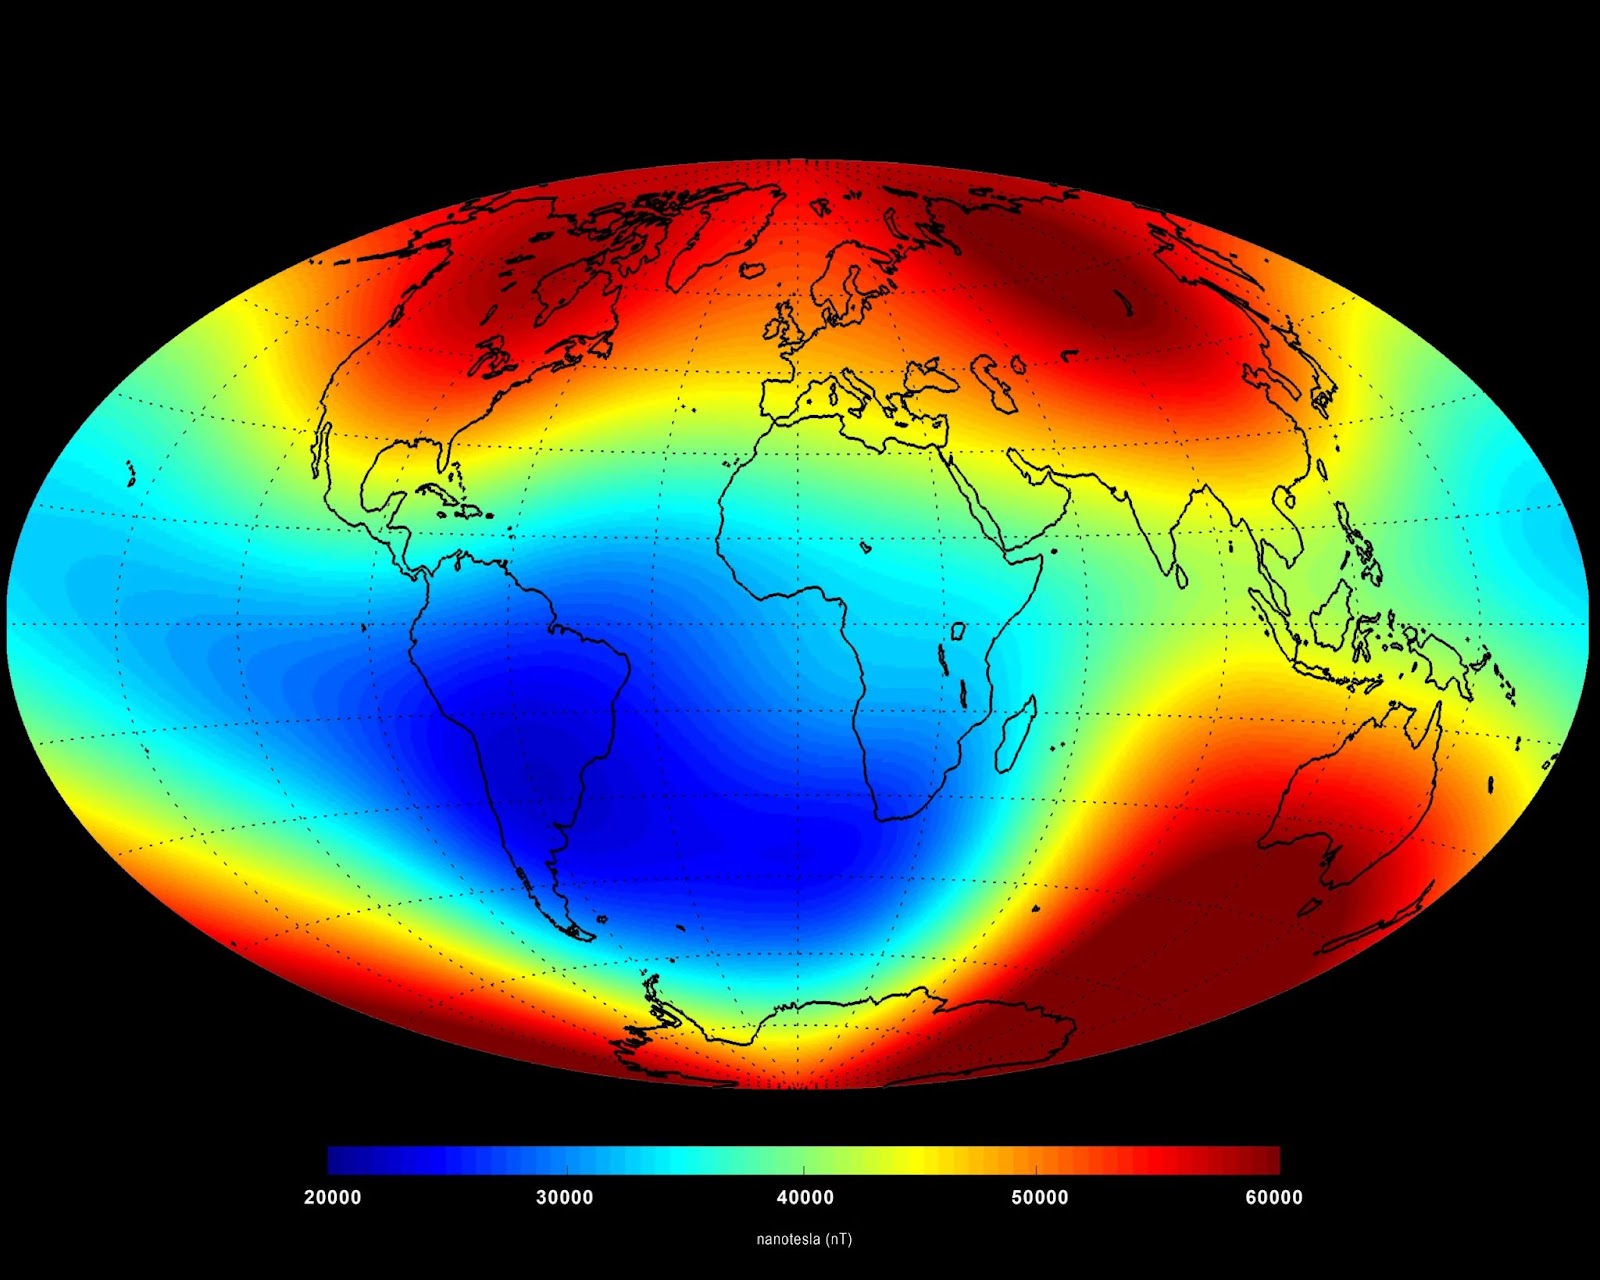 A heat map of Earth. A scale at the bottom in nanotesla, a unit of measurement for magnetic fields, denotes blue as a weaker magnetic field and red as a stronger magnetic field. The North Pole in dark red fades to yellow through North America and Asia. The South Pole in dark red extends up towards Australia. South America, Africa, and Asia are blue and green.